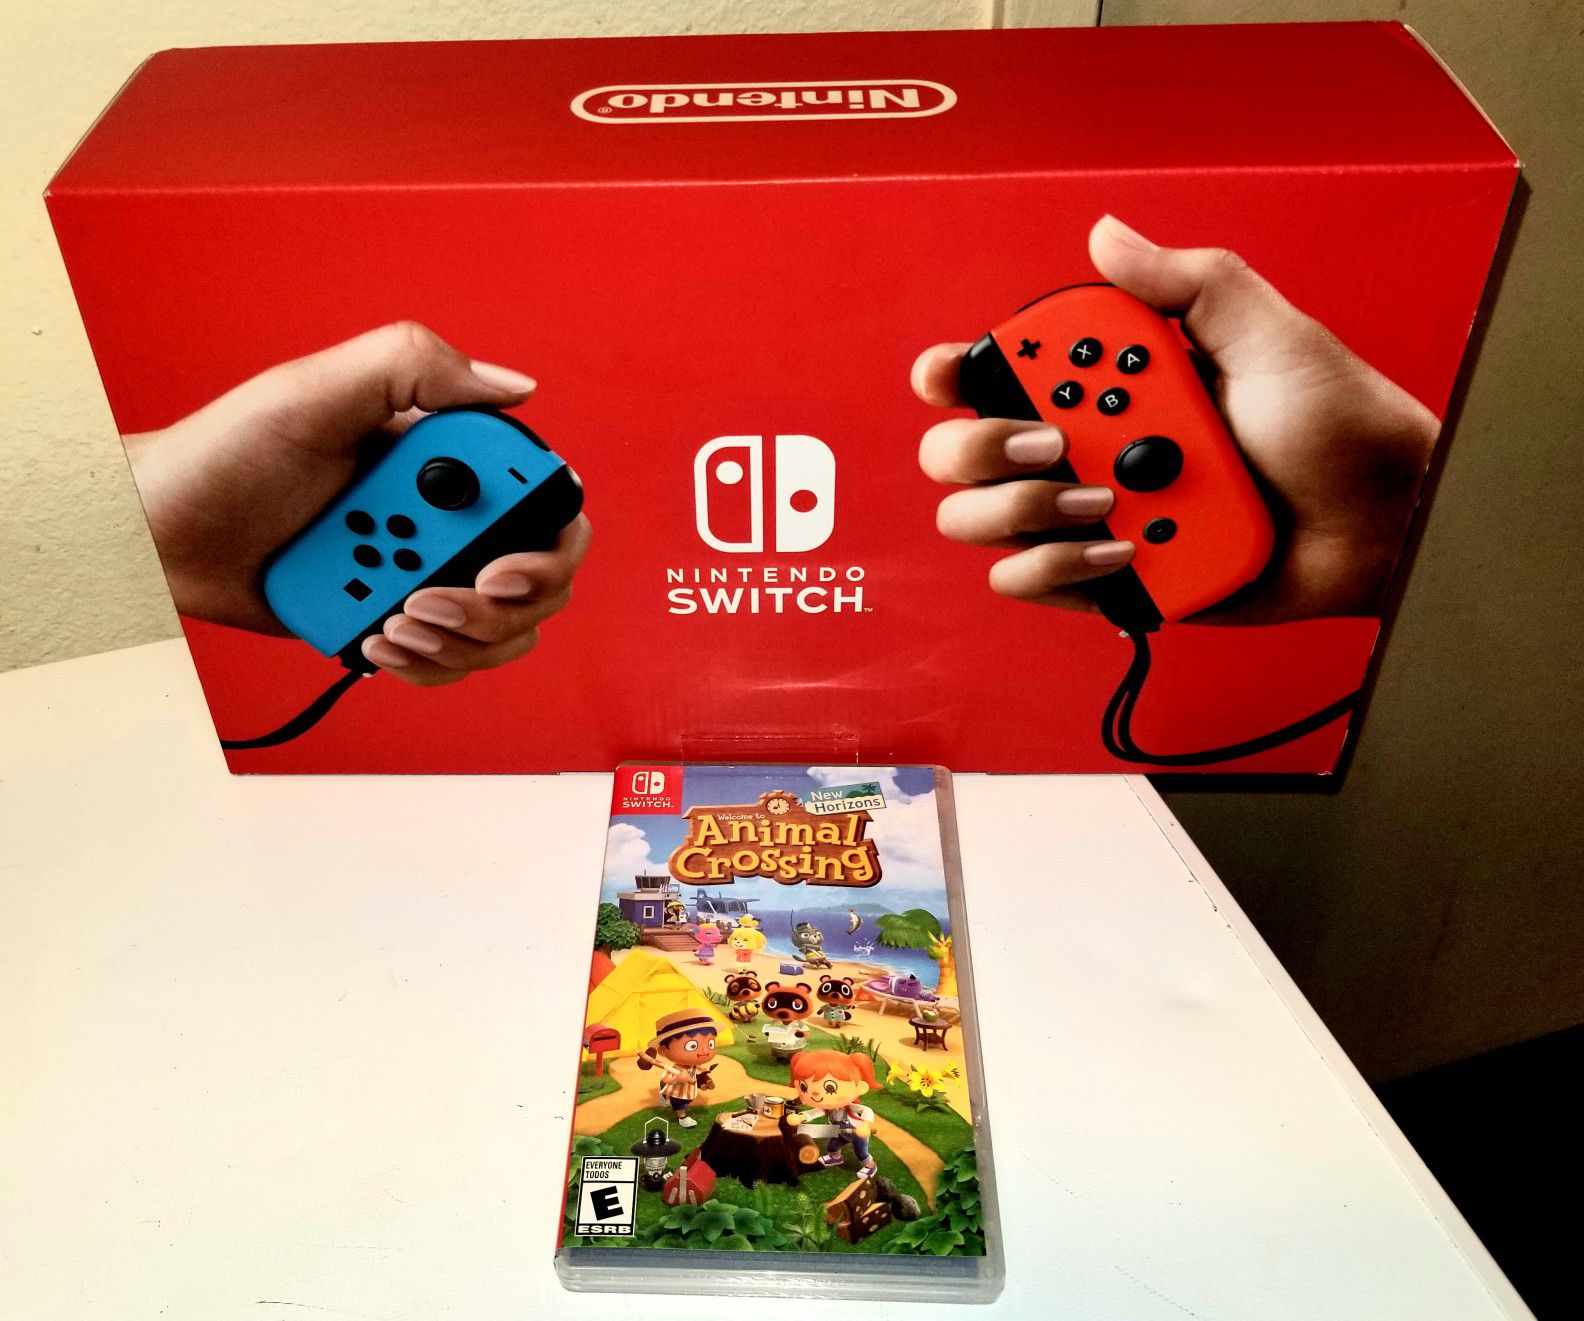 NINTENDO SWITCH GRAY OR NEON B/R V2 BRAND NEW WITH ANIMAL CROSSING NEW HORIZONS BRAND NEW SEALED